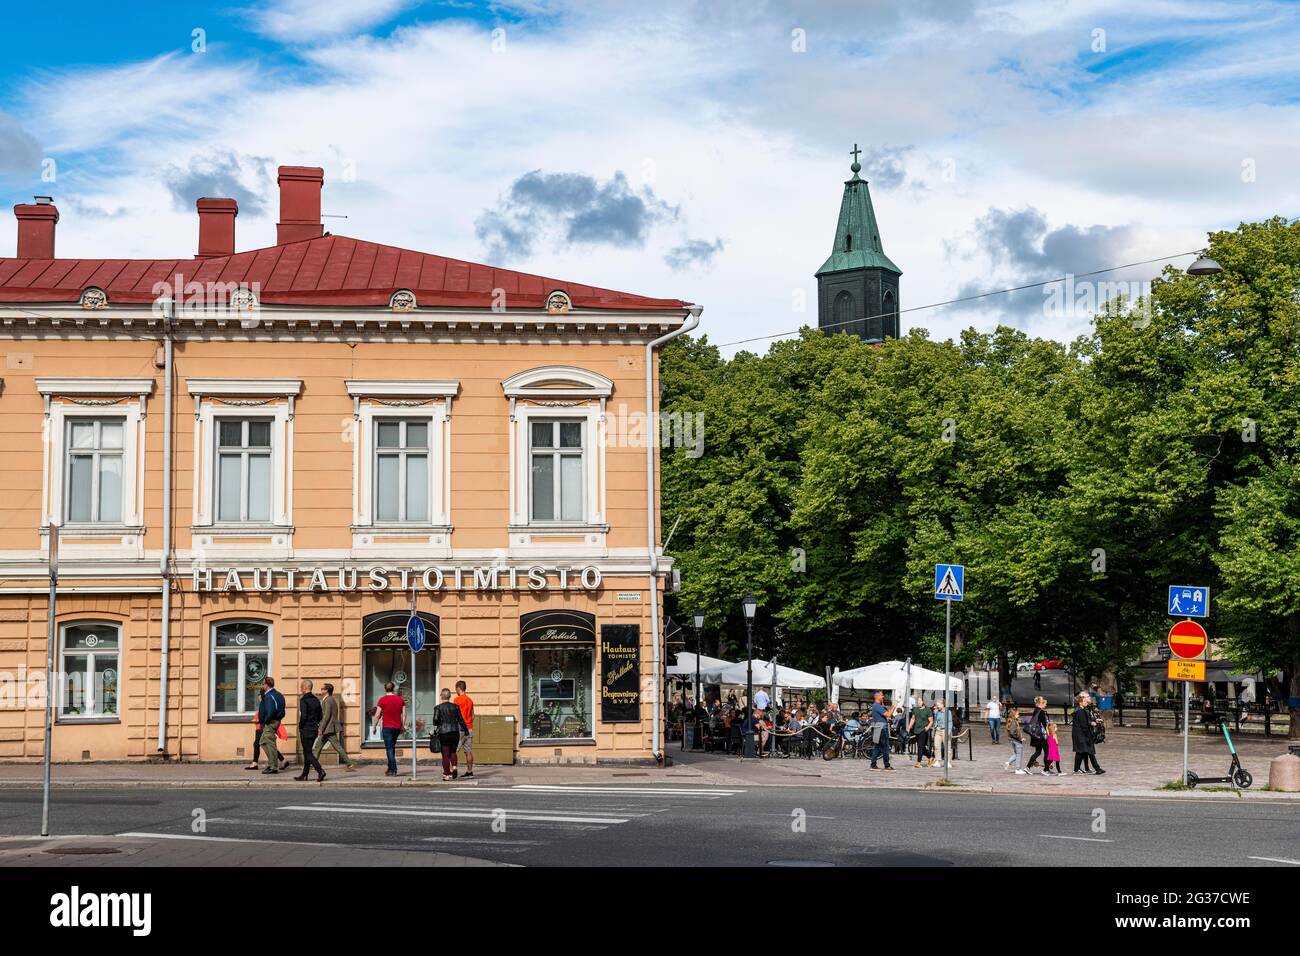 Cafe in downtown Turku, Finland Stock Photo